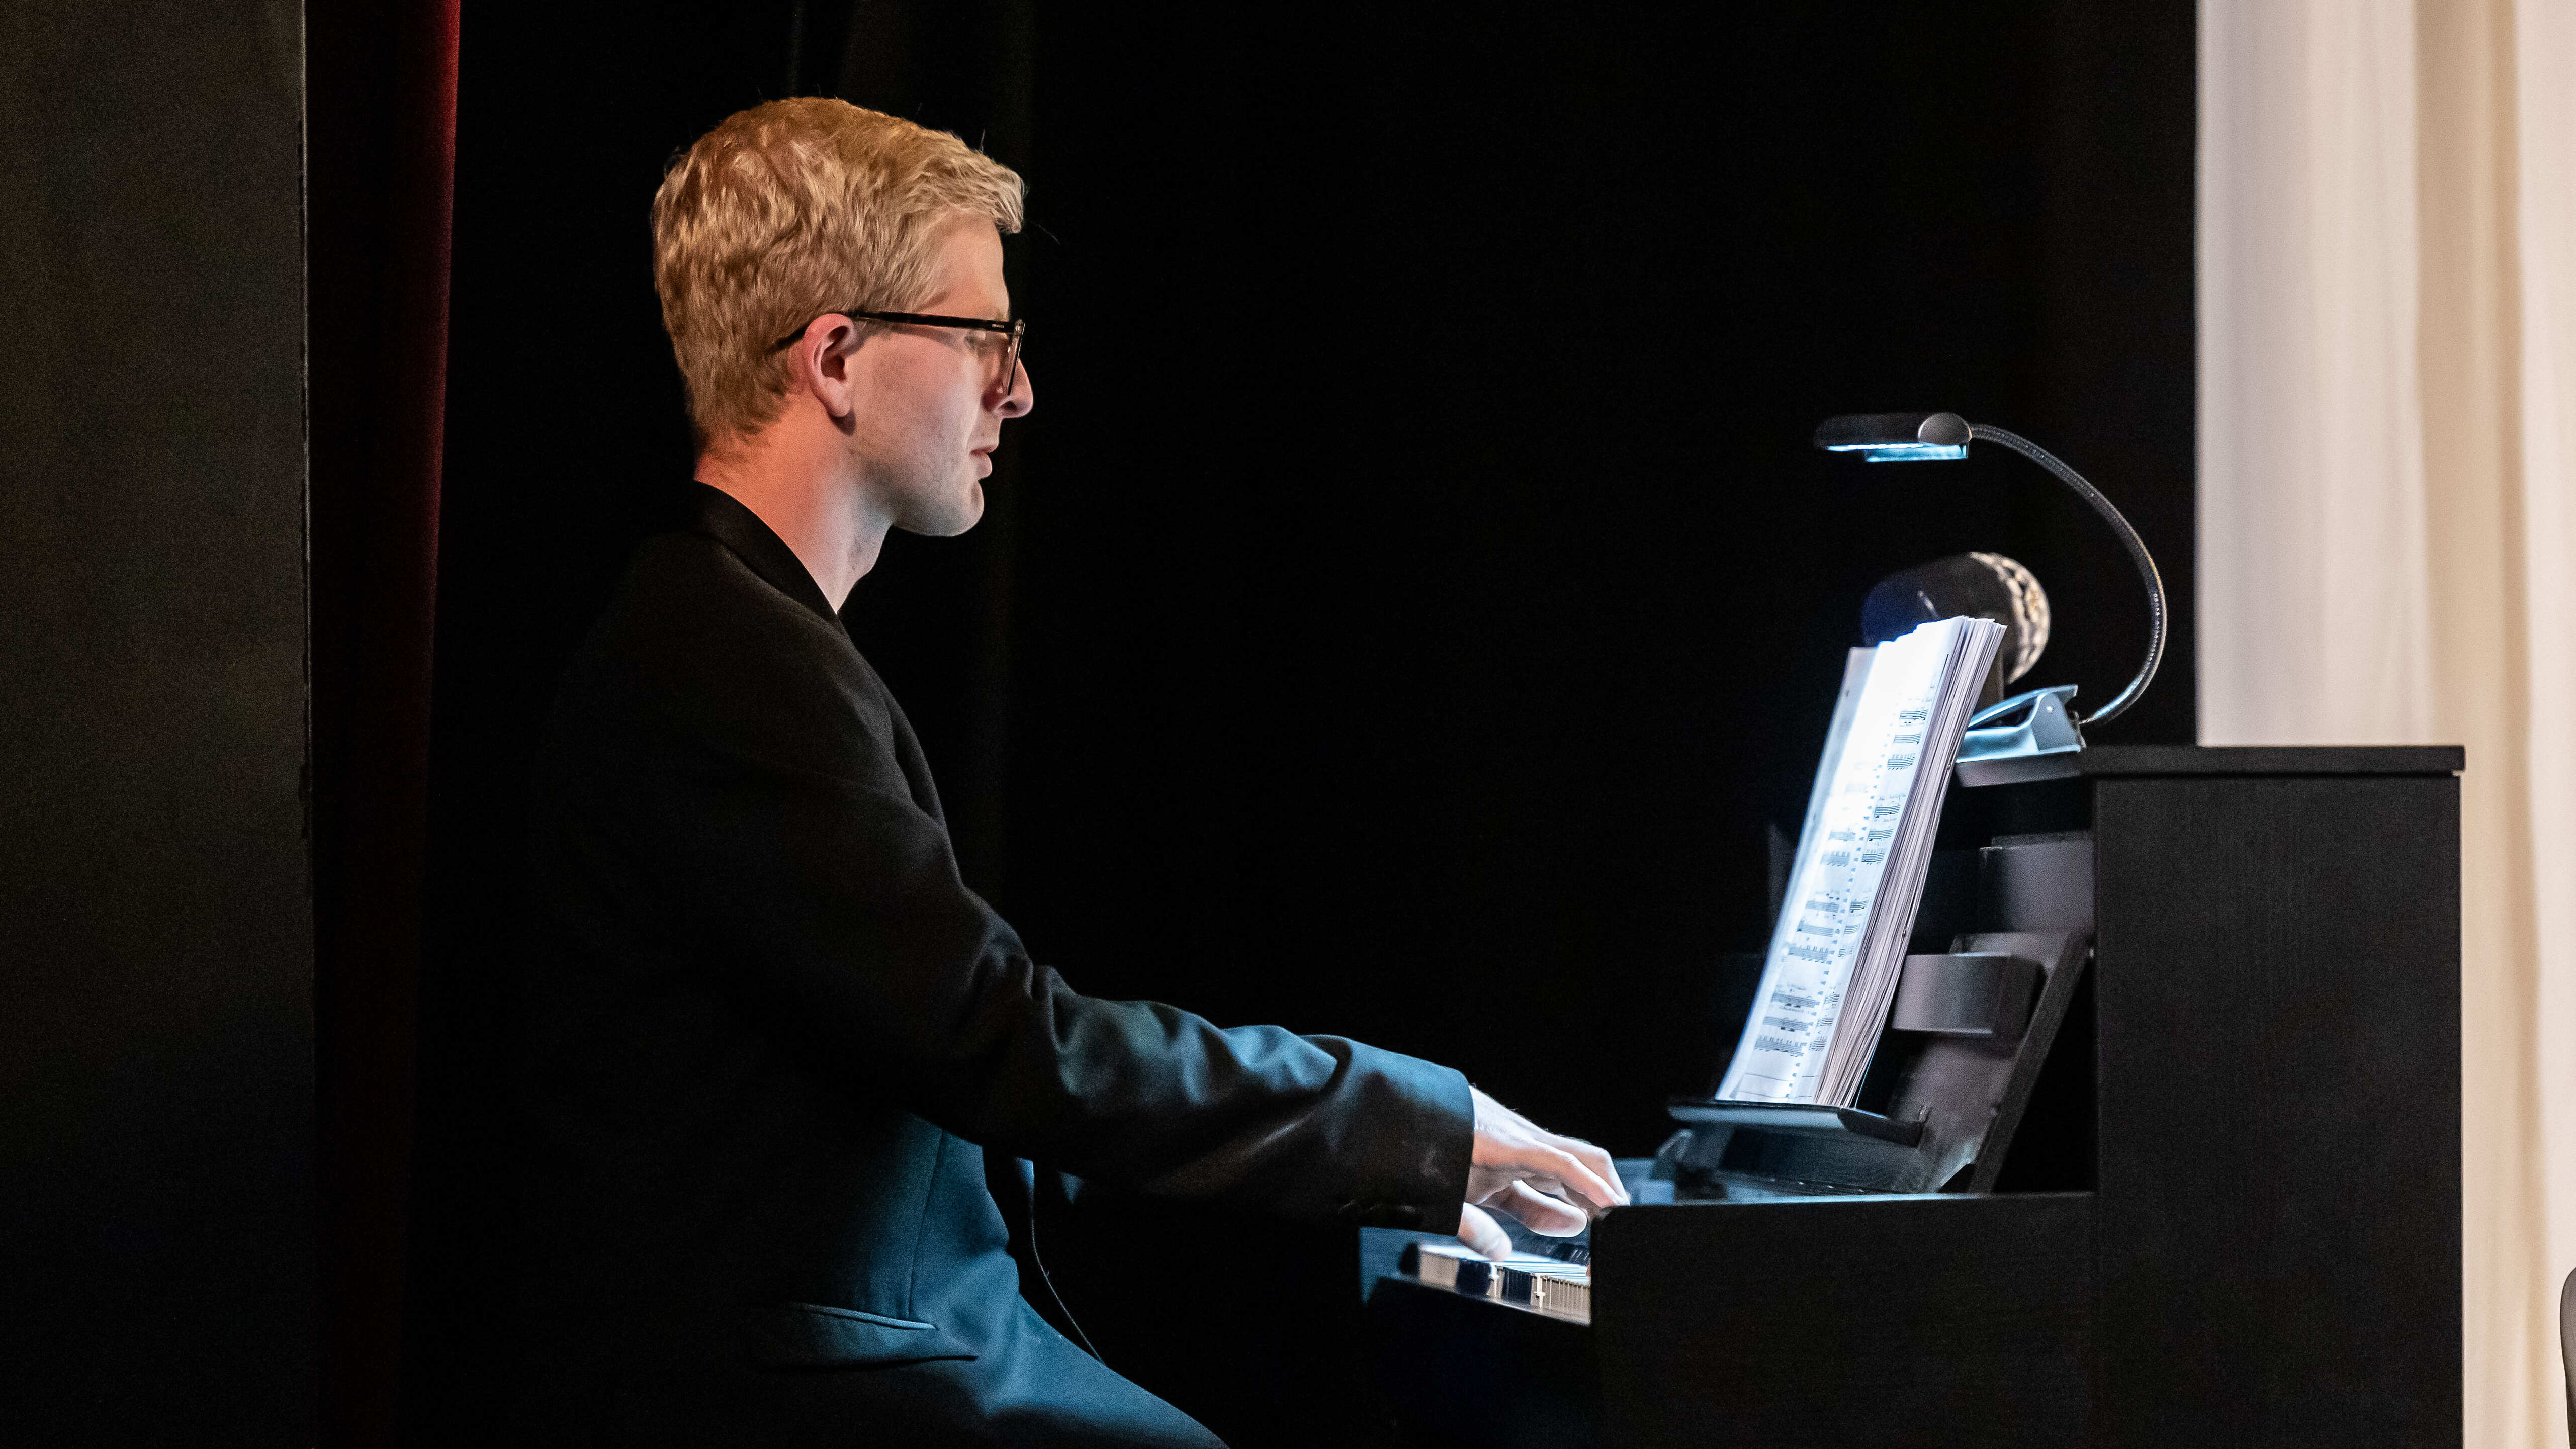 A white, blonde man with glasses plays the piano.